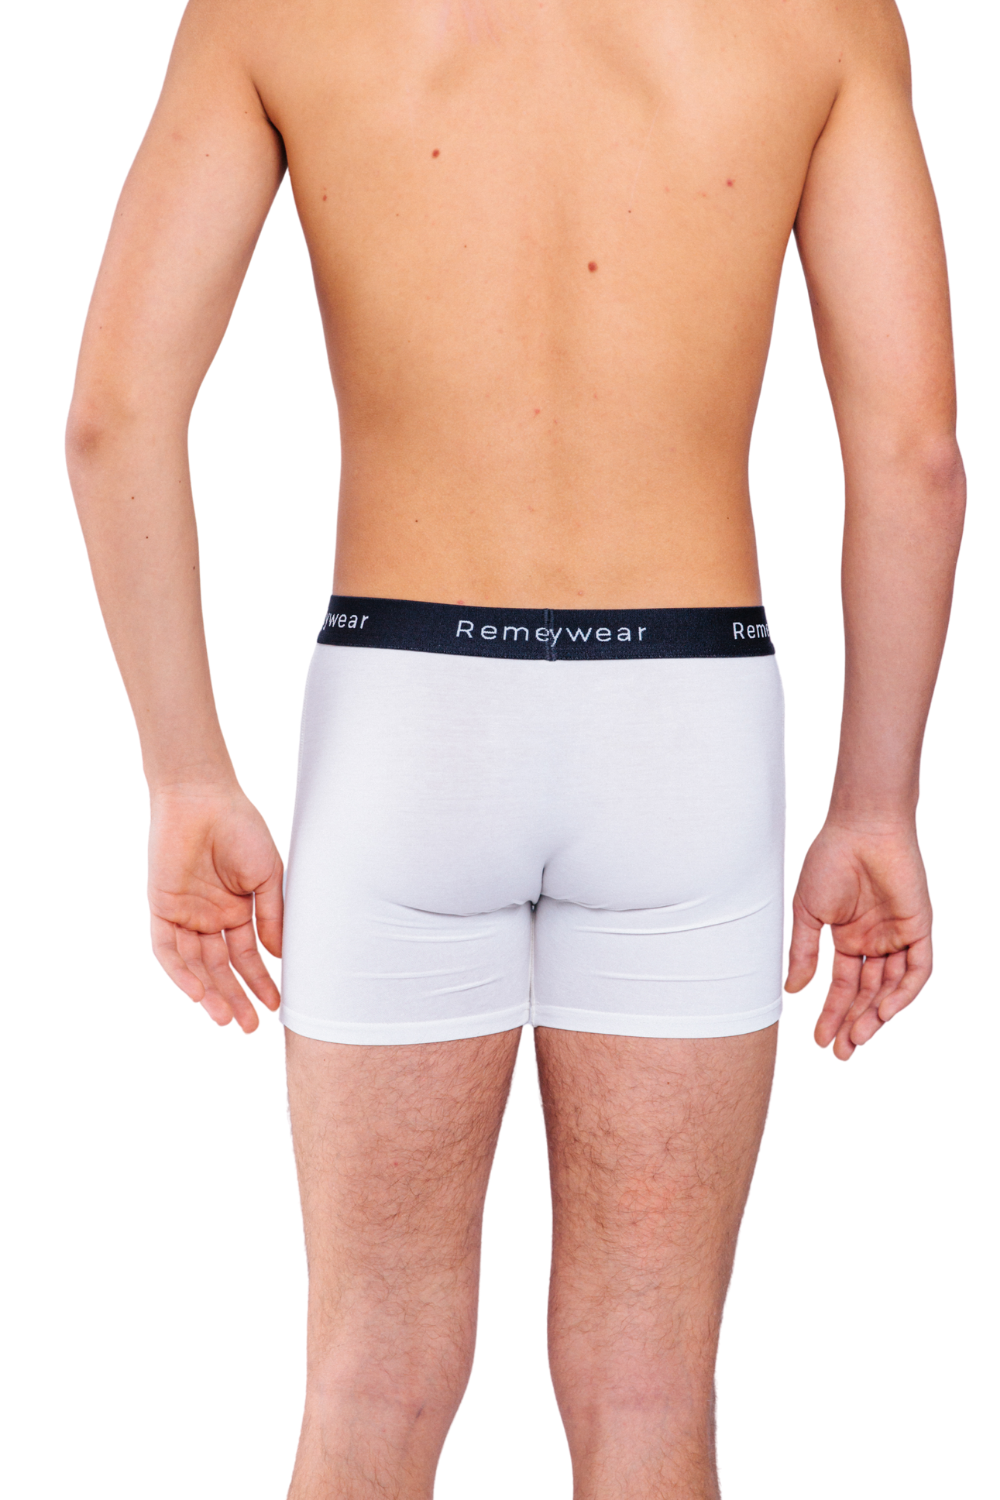 Remedywear Boxers - itchy groin treatment